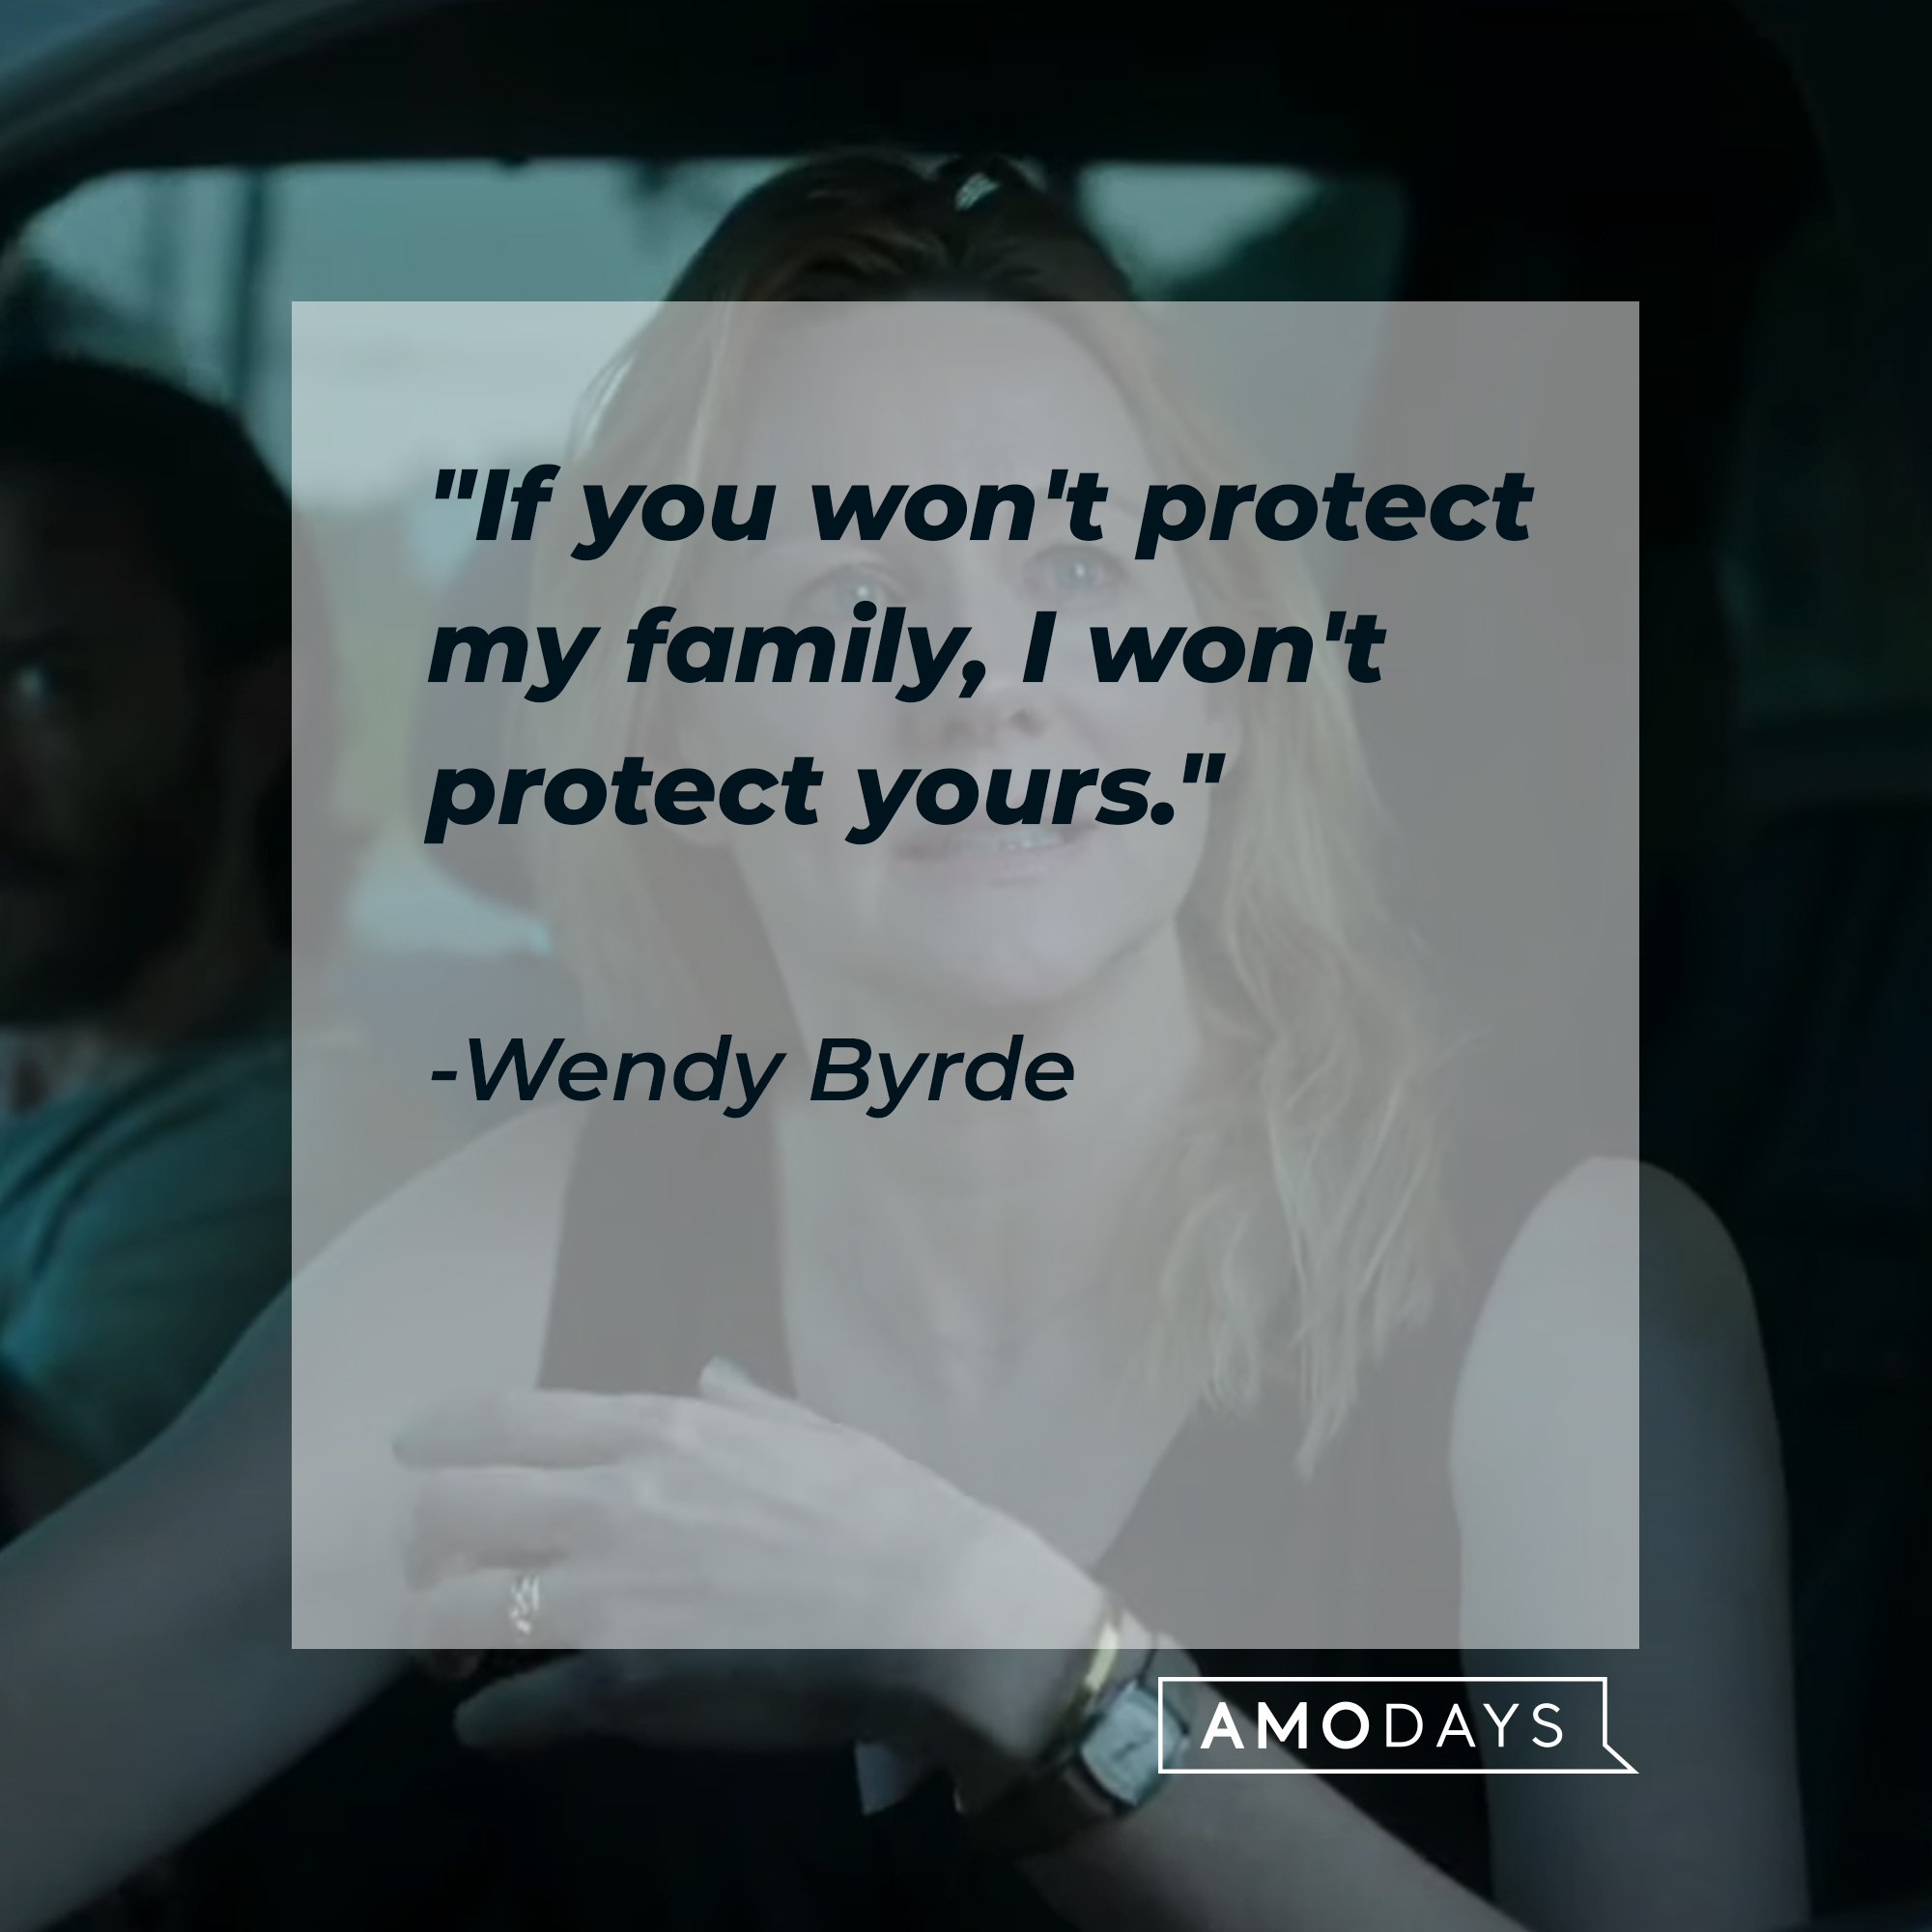 Wendy Byrde’s quote: “If you won't protect my family, I won't protect yours.” | Source: facebook.com/OzarkNetflix